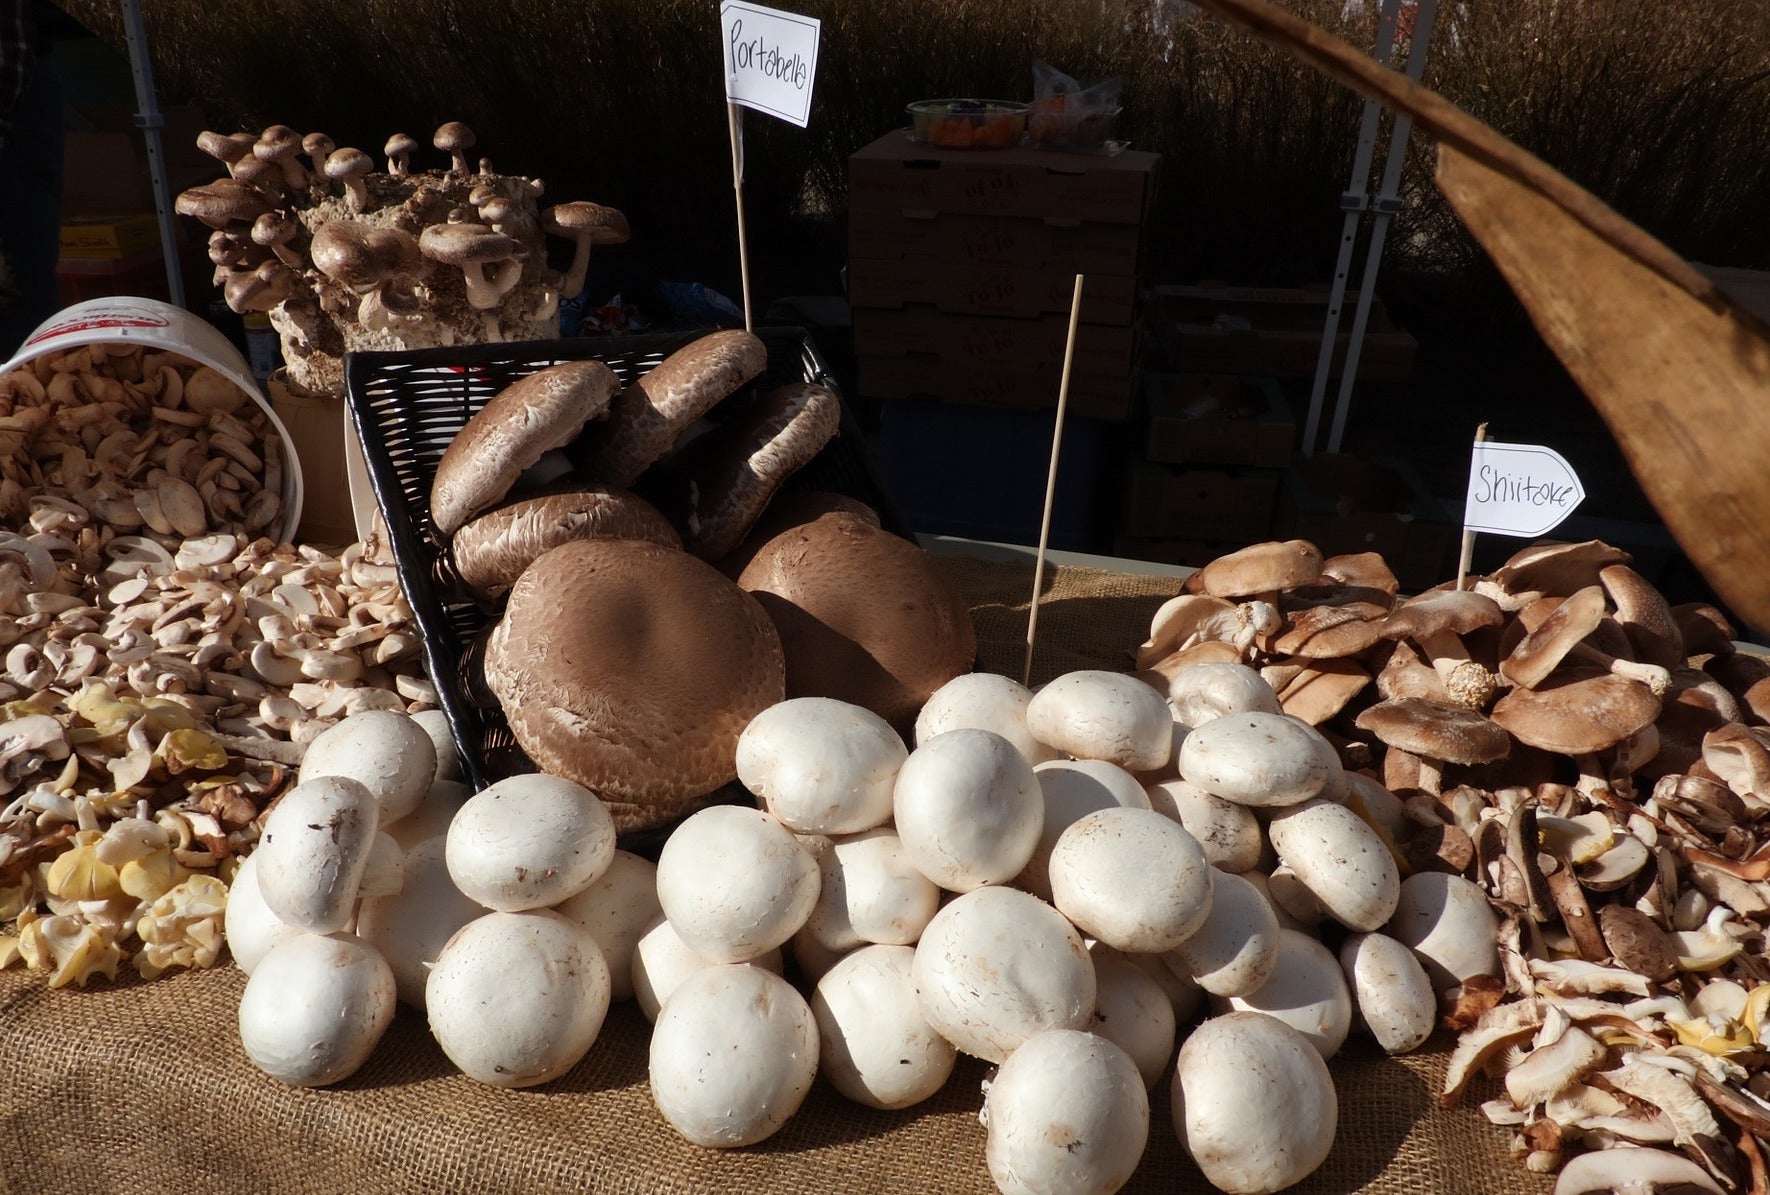 a variety of mushrooms include white button mushrooms, portabello, and shiitake